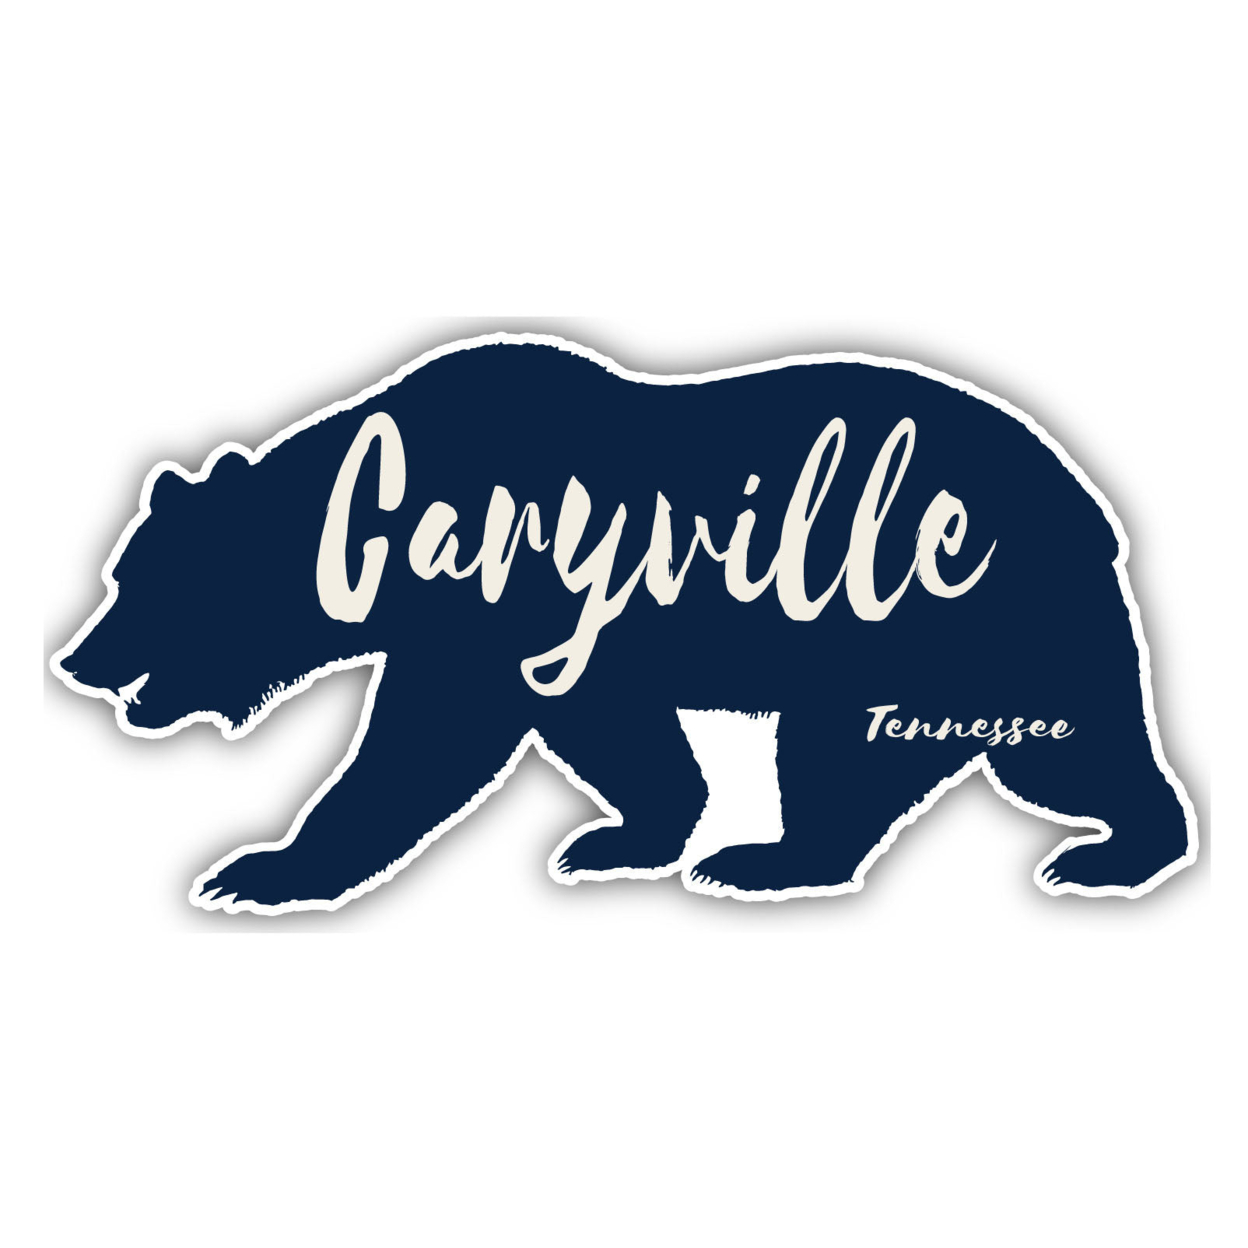 Caryville Tennessee Souvenir Decorative Stickers (Choose Theme And Size) - Single Unit, 12-Inch, Bear